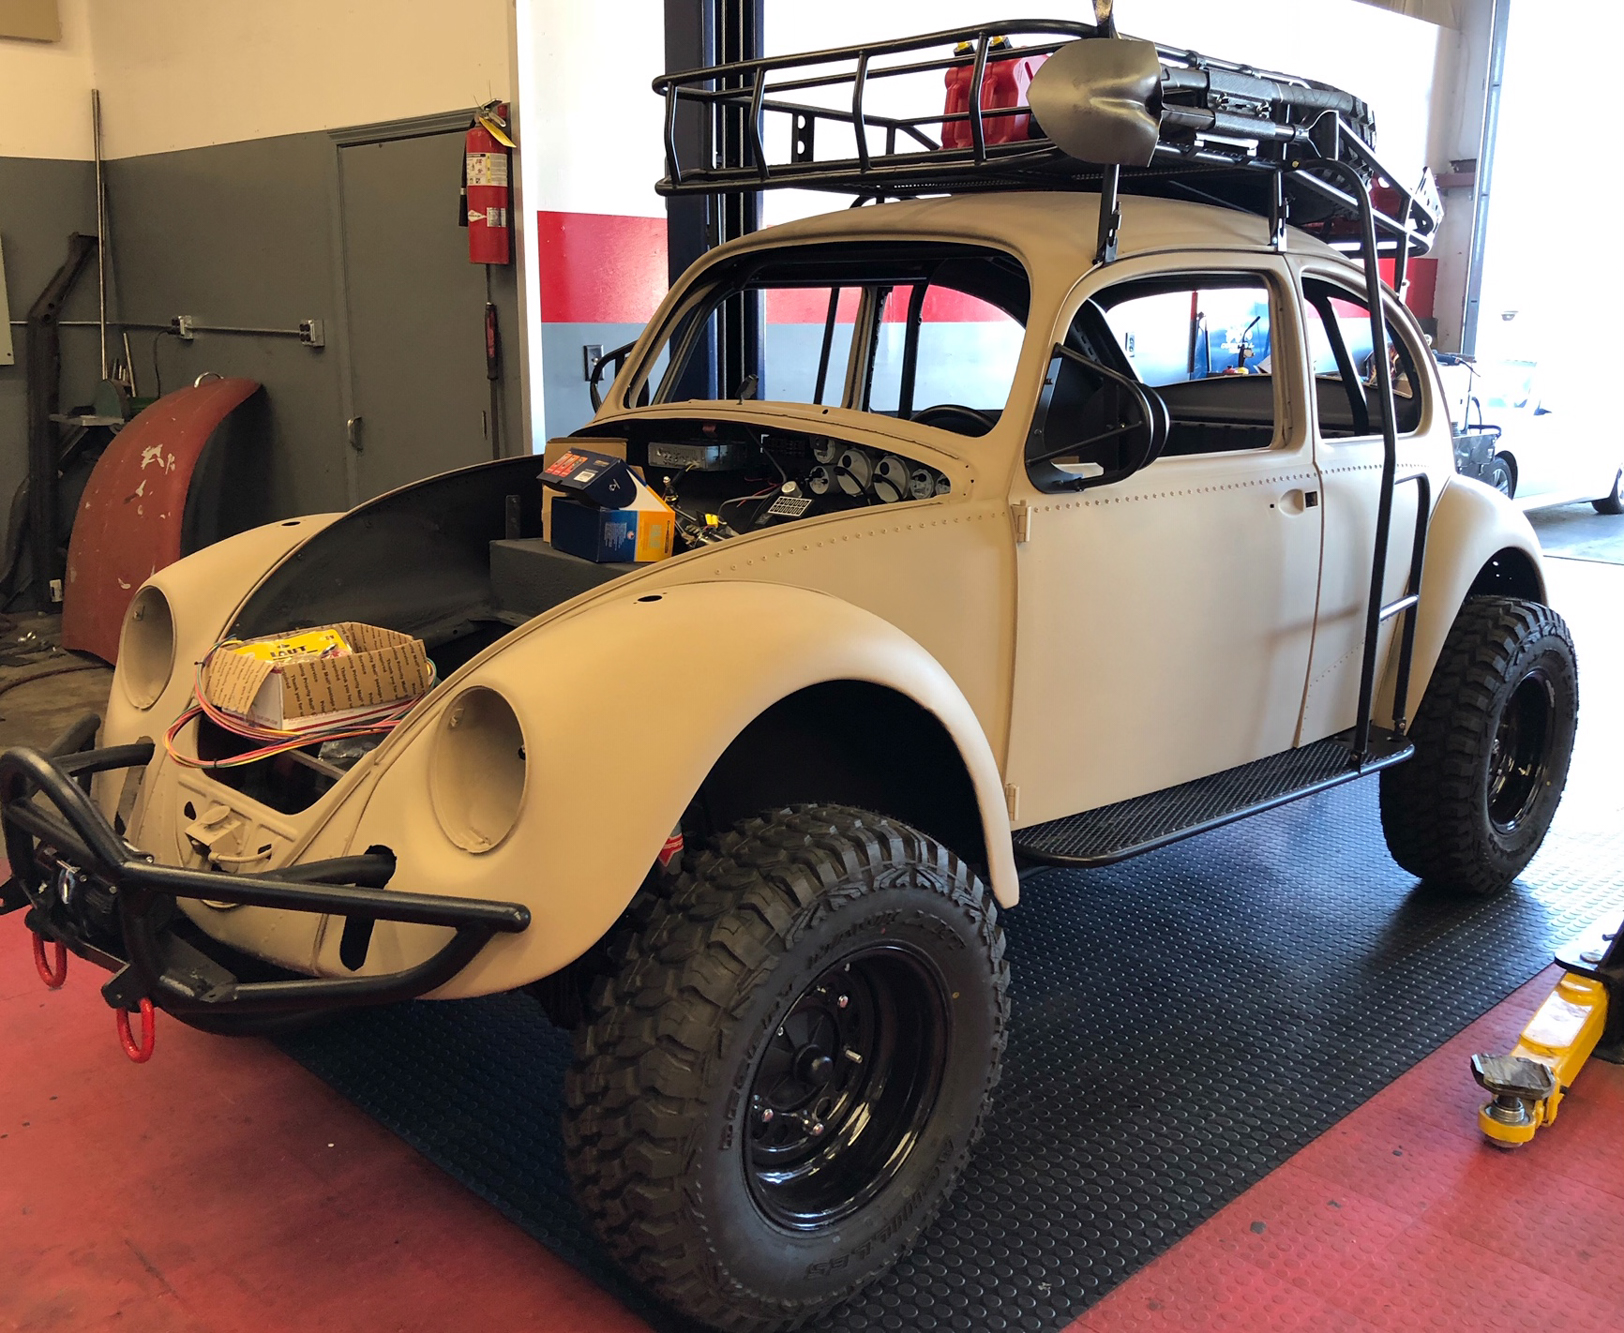 An Overland Build Like No Other – Meet This Insane 1967 Overland Bug